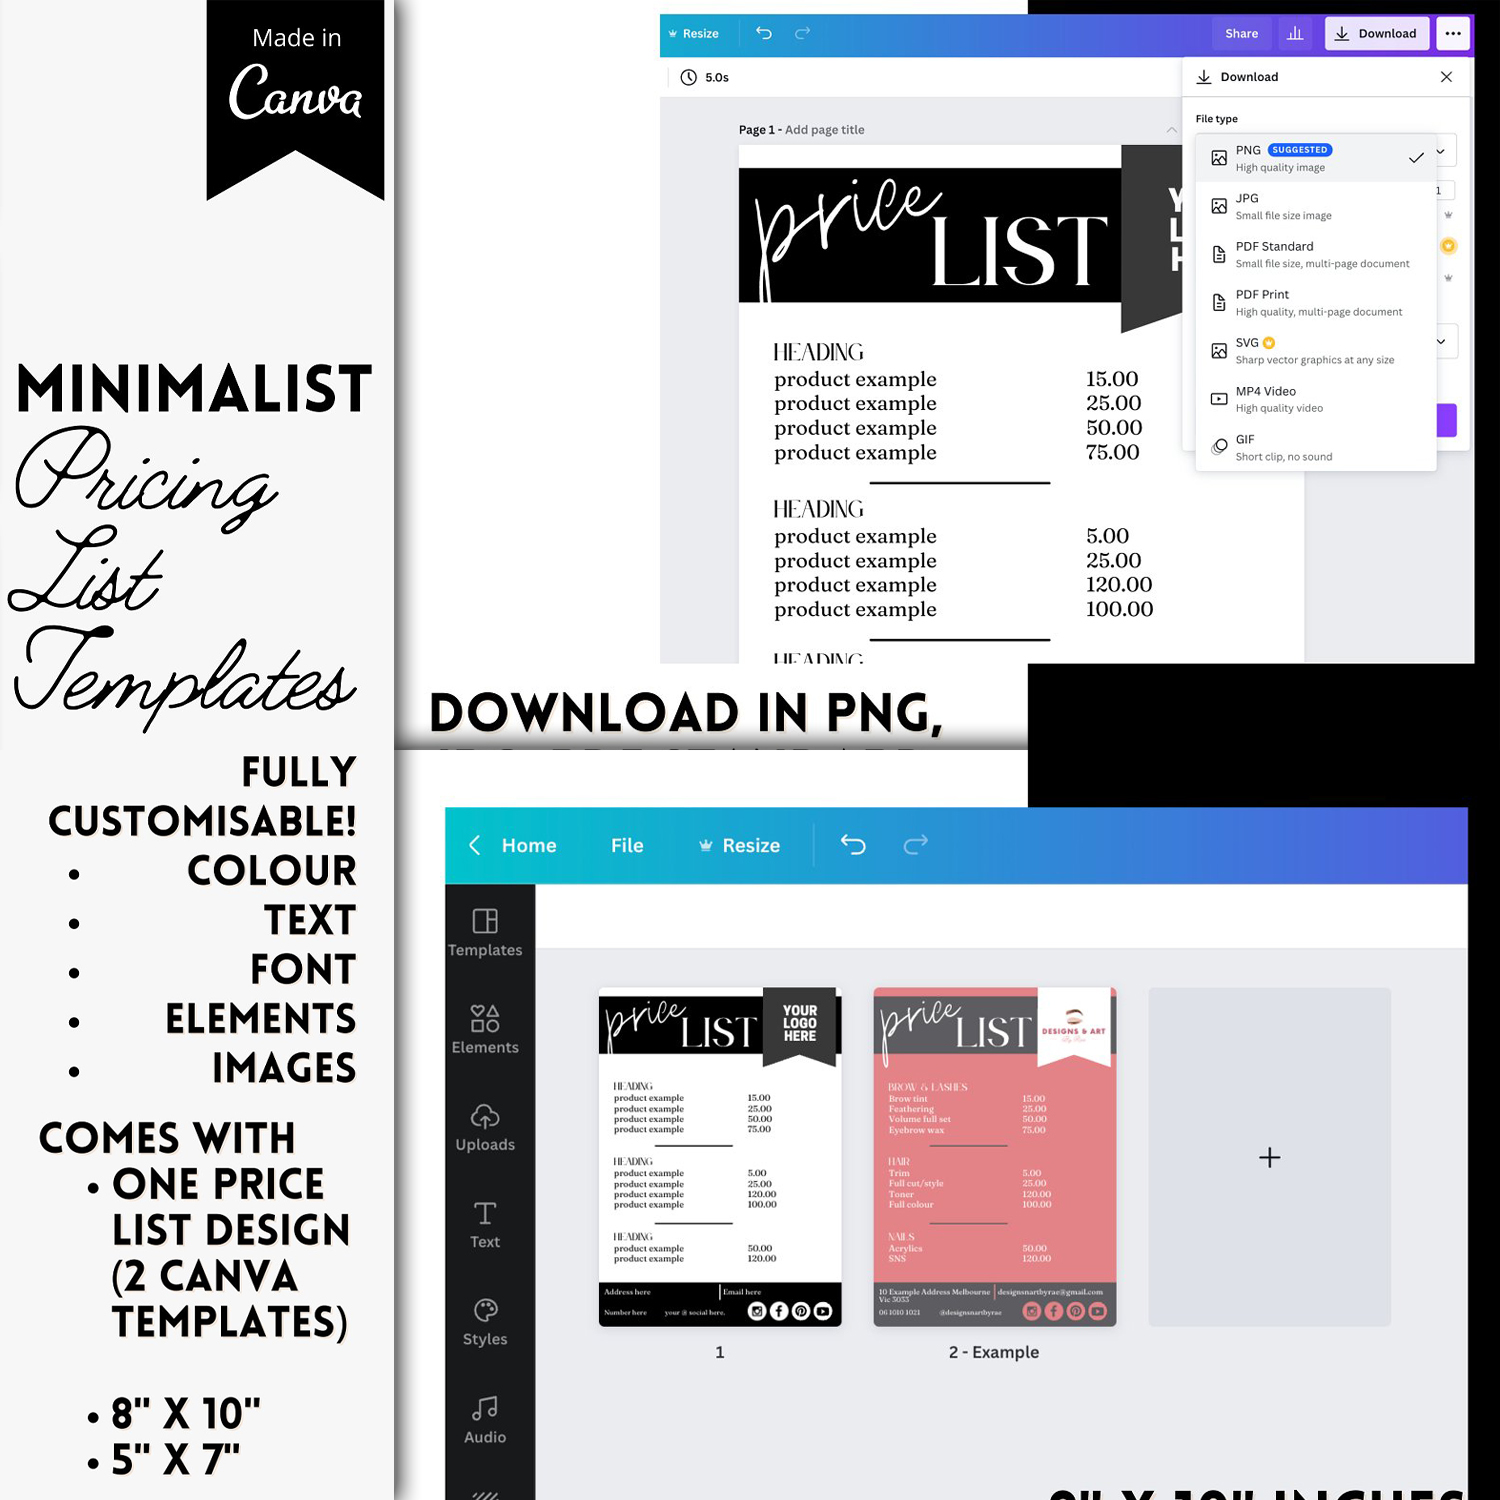 Preview minimalist pricing list template.